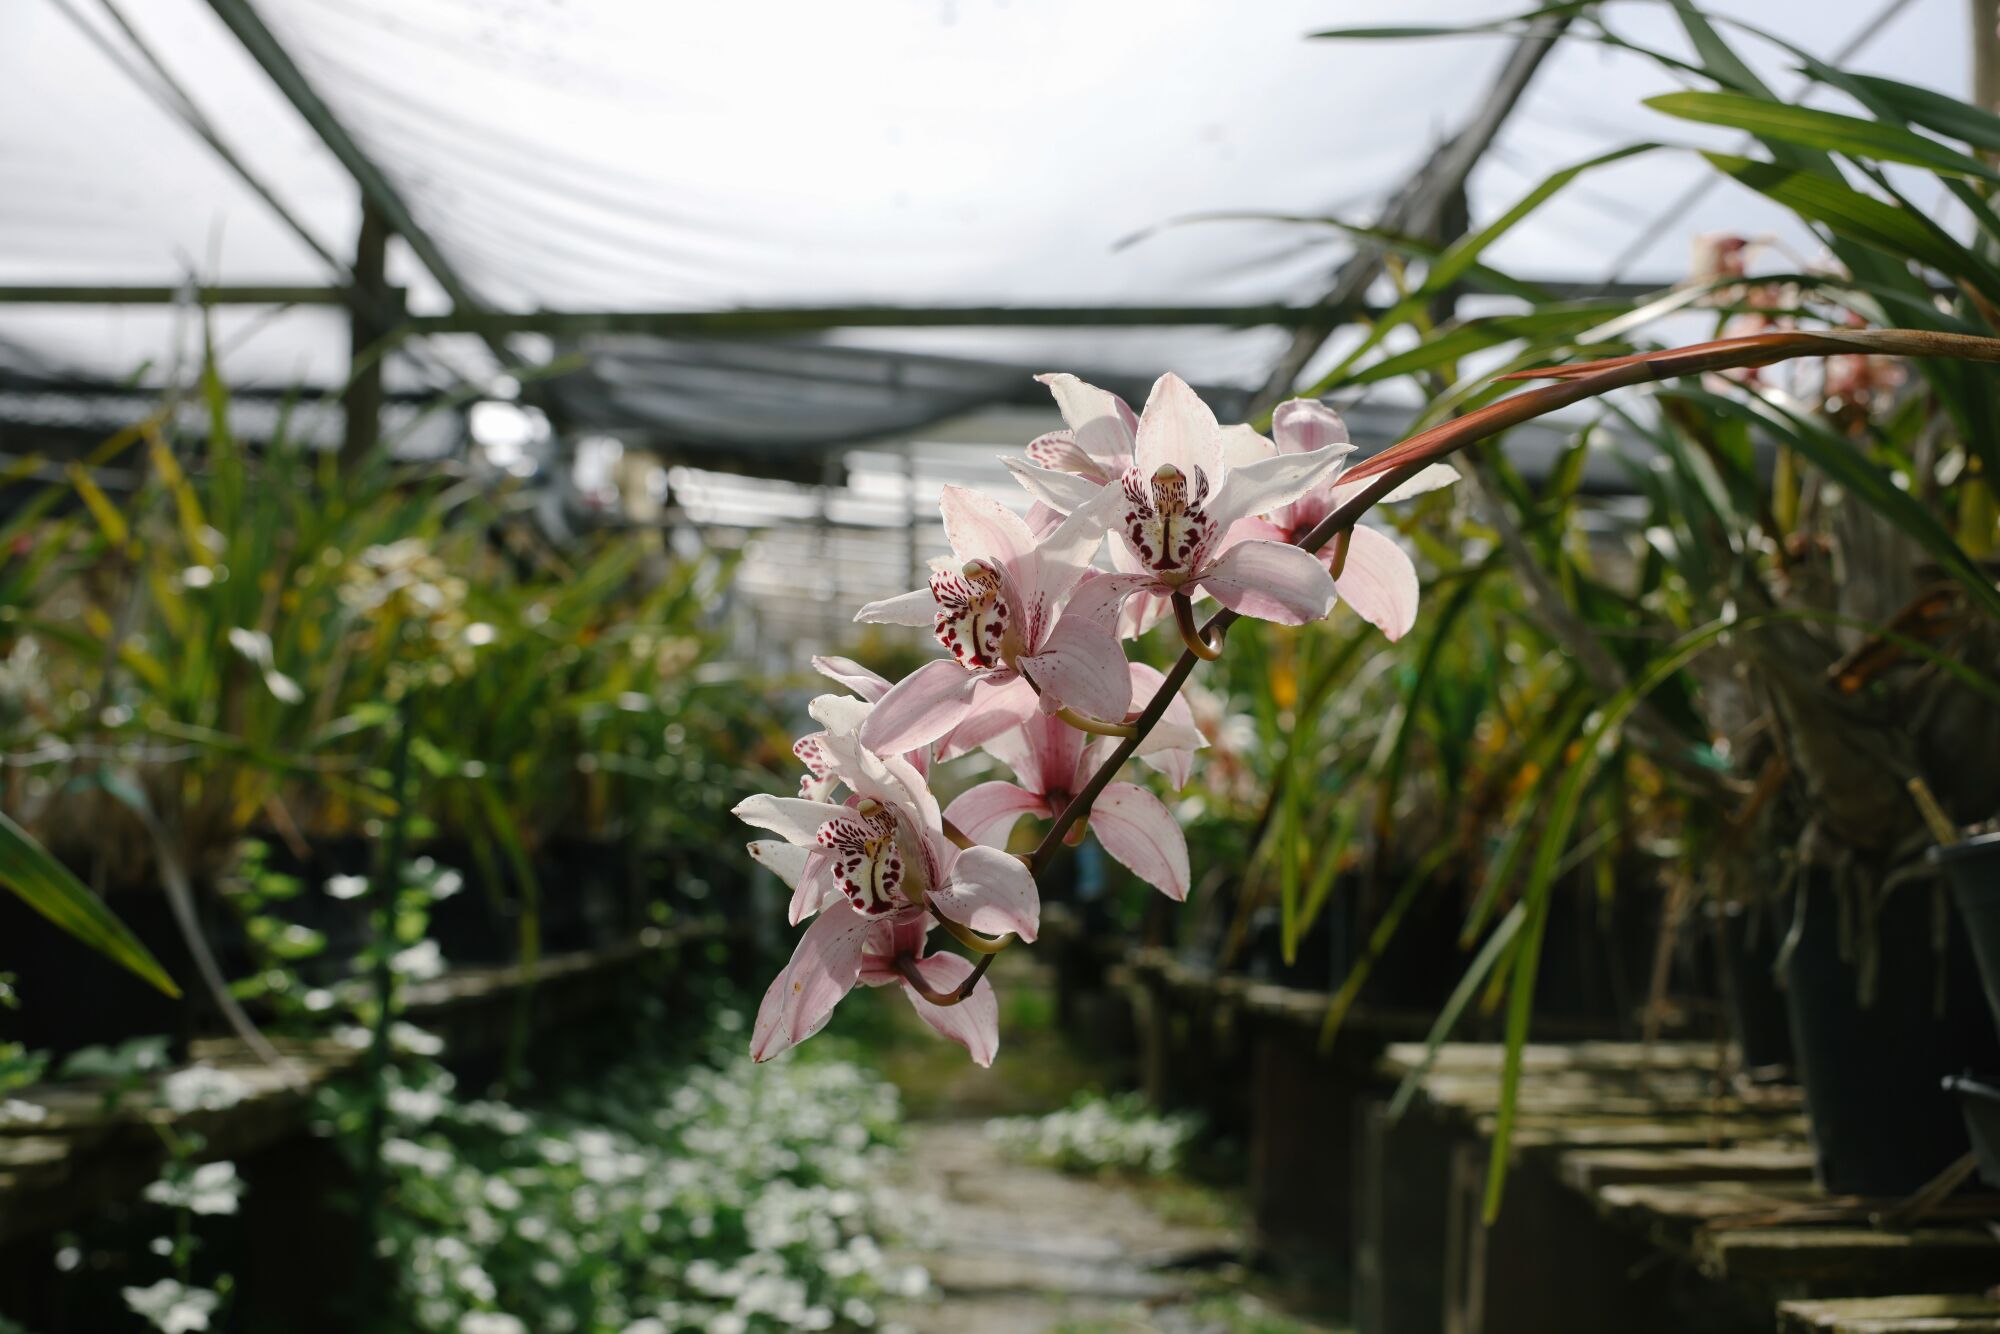 A row of orchids in a greenhouse